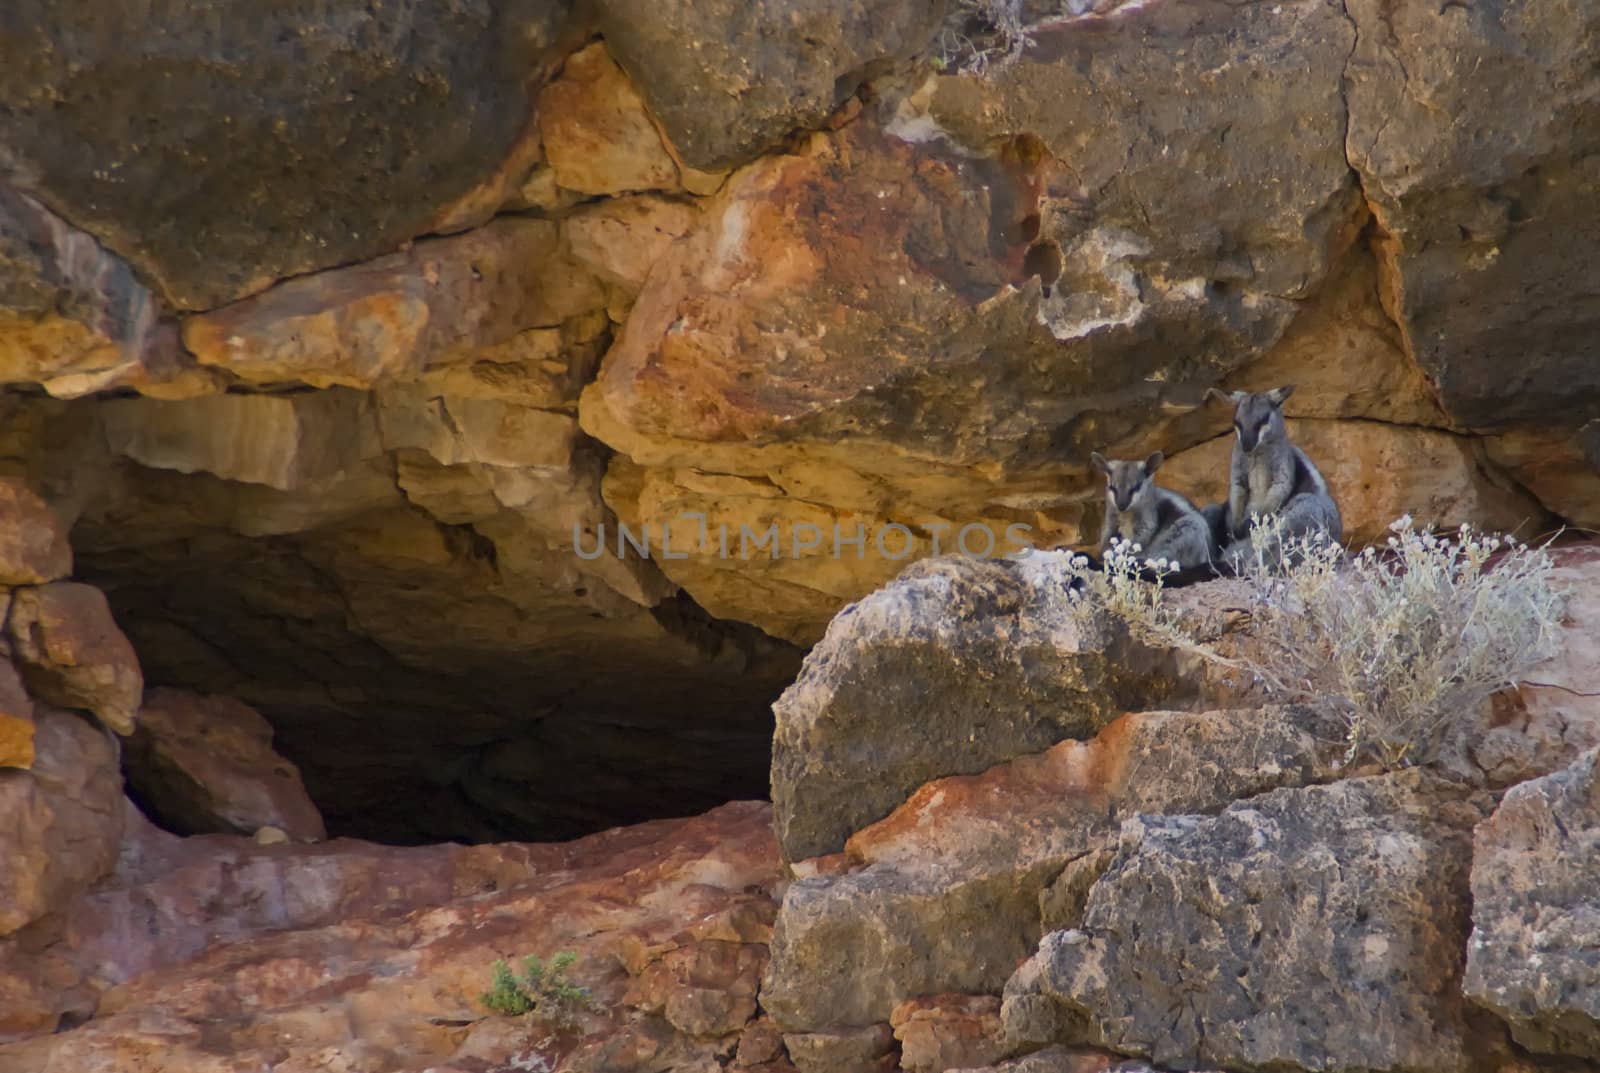 Couple of rock wallabies near their lair on the cliff above an enclosed river on the Western coast of Australia near Exmouth.